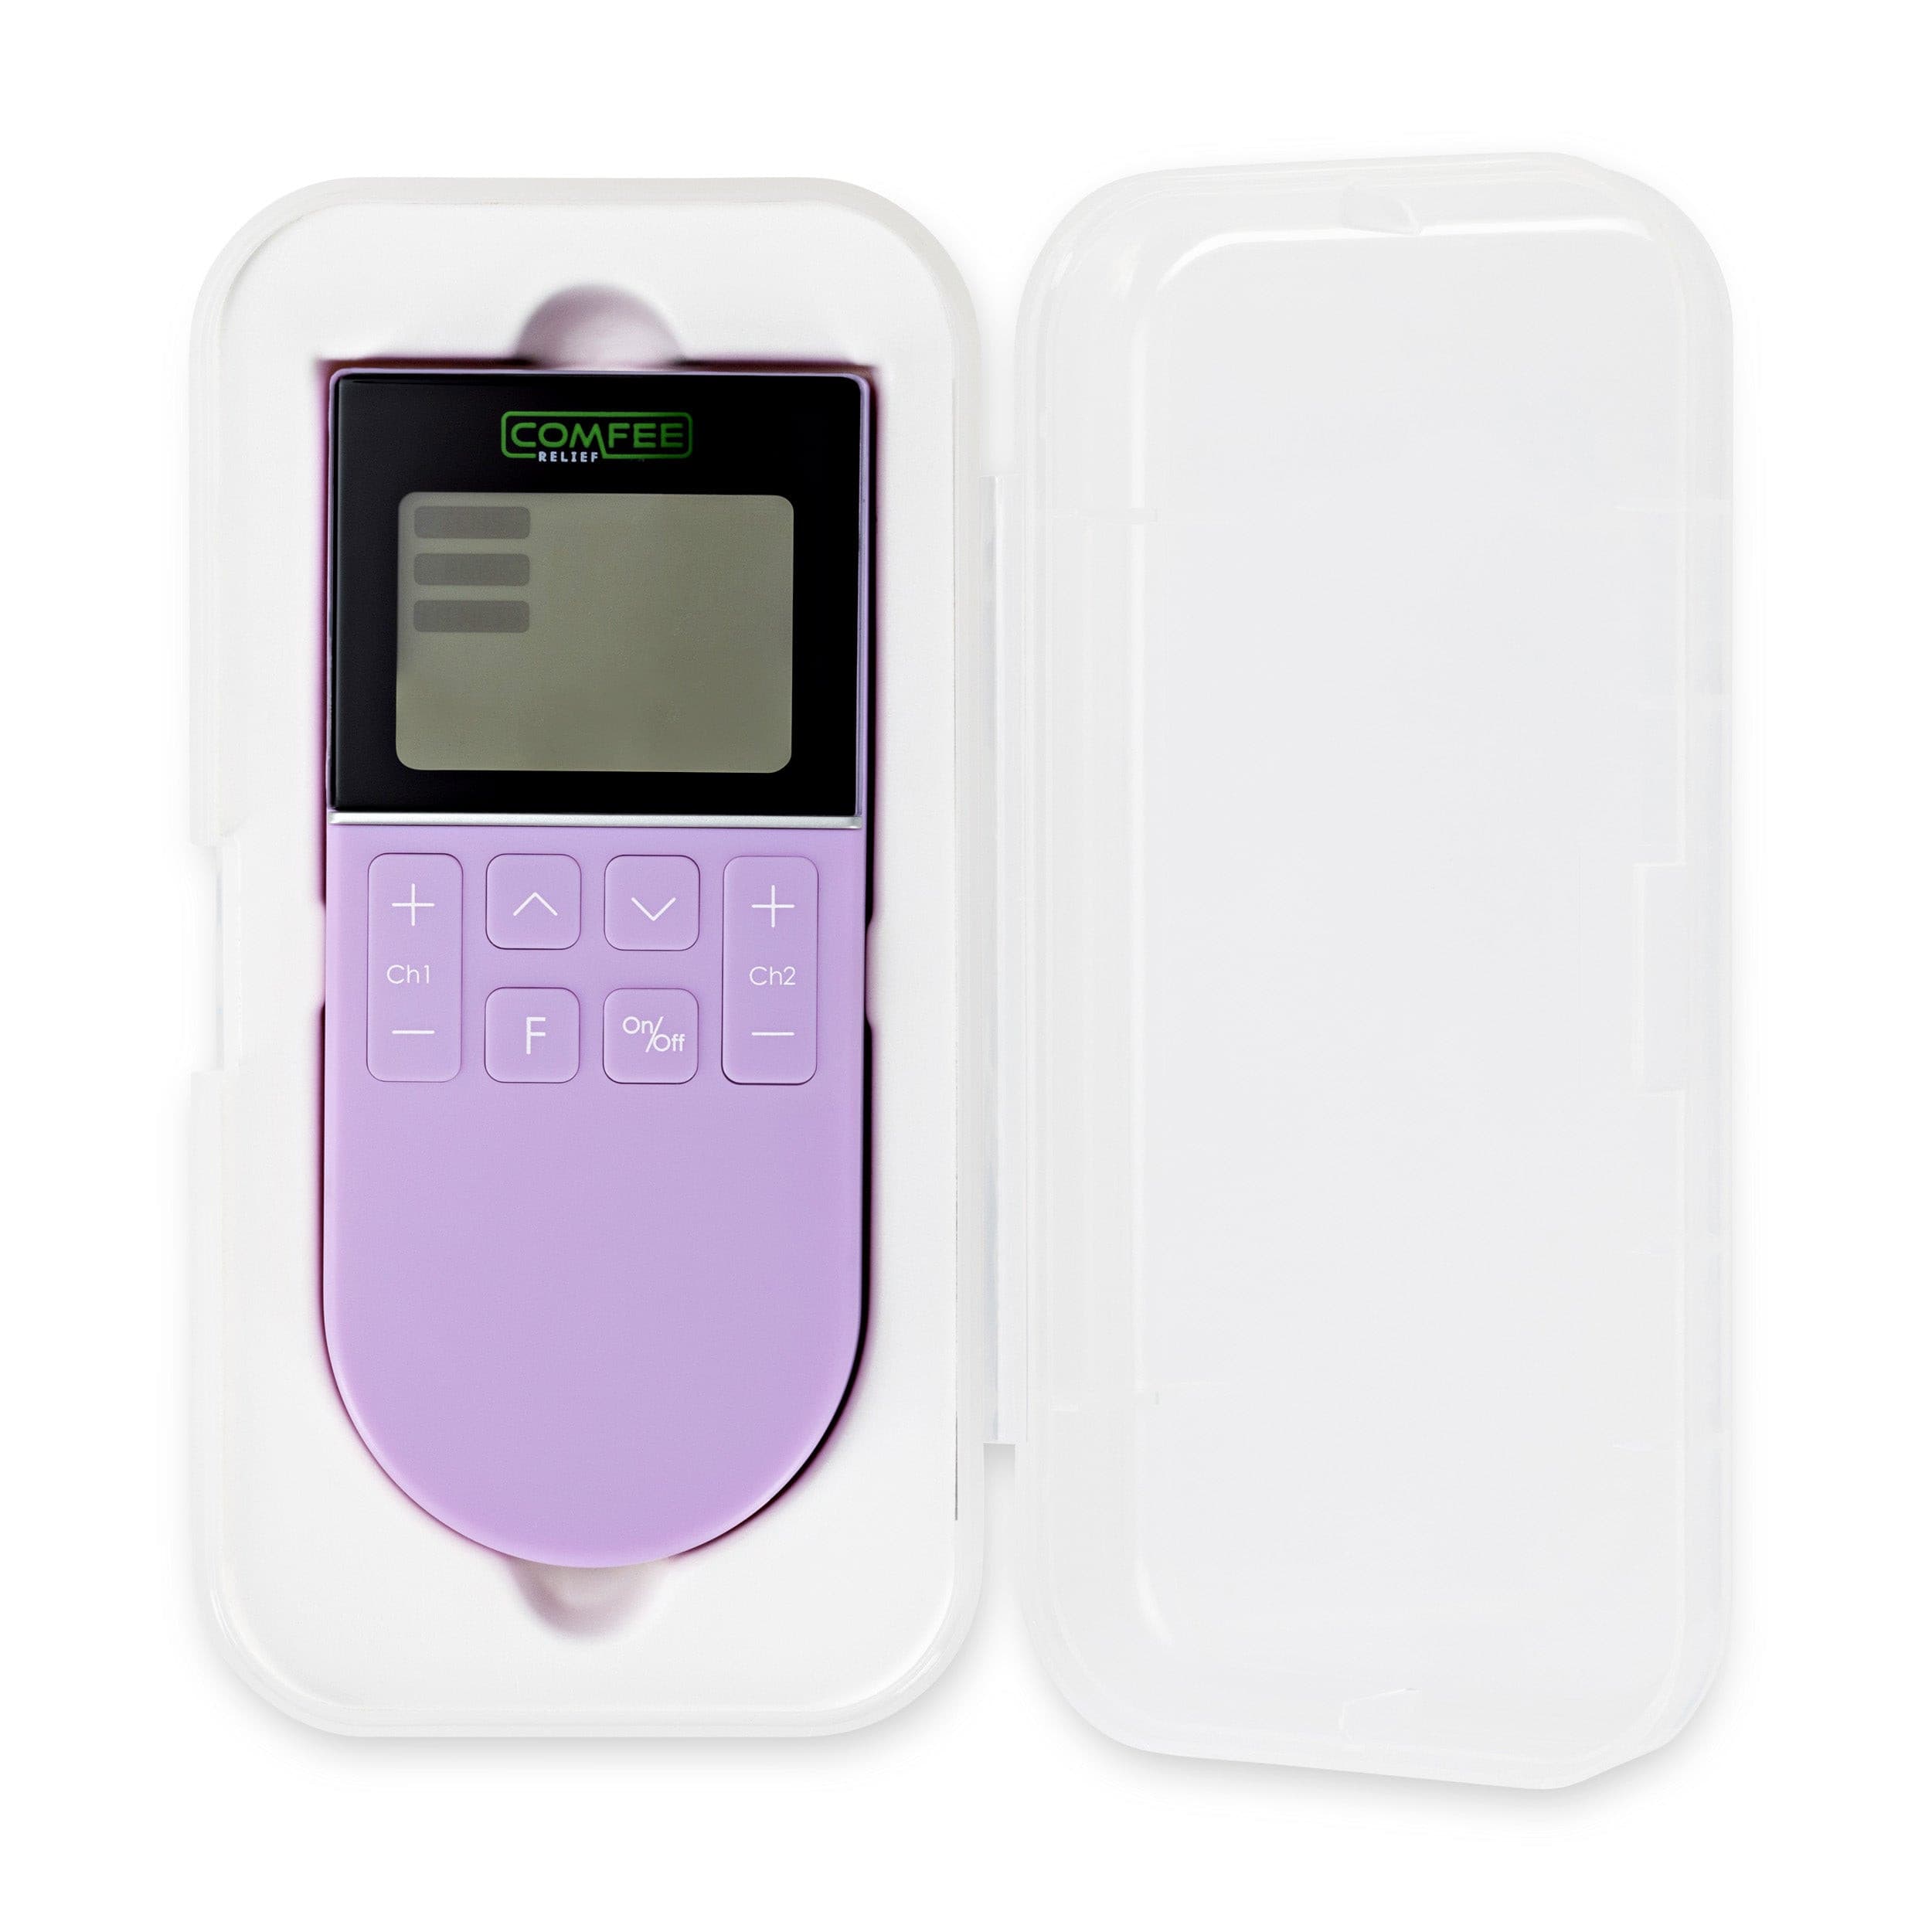 TENS Comfee Power3 is in its carry box with a white background. The colour of the TENS machine is purple and you can clearly see the Comfee Relief logo on the top of the TENS machine. 